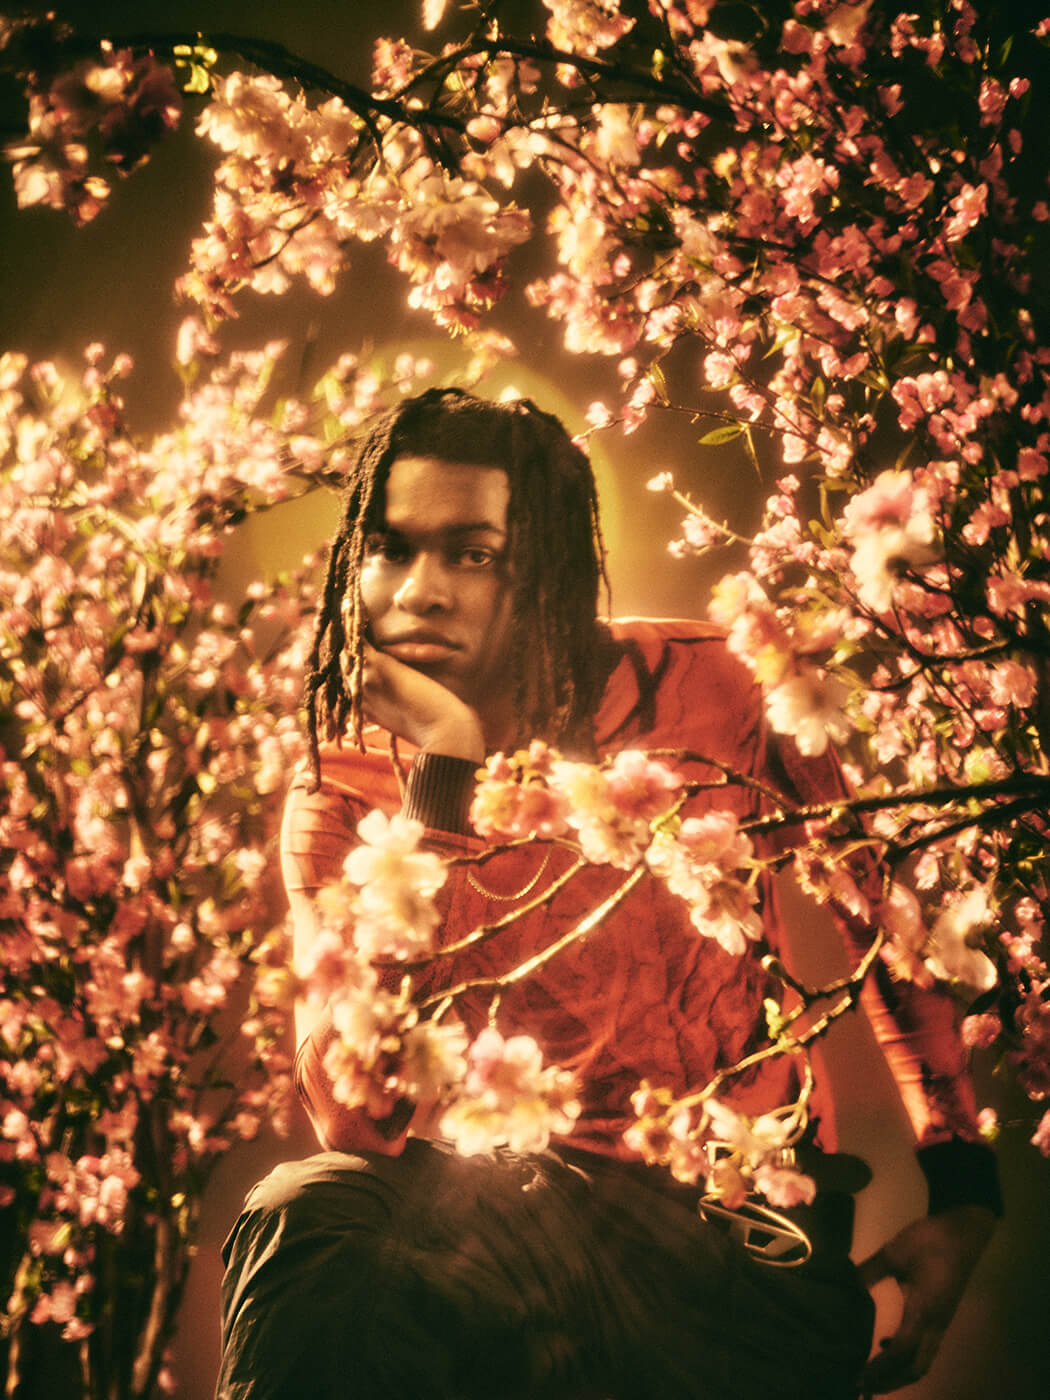 Jordan Adetunji surrounded by cherry blossoms and orange hues, photo by Frank Fieber